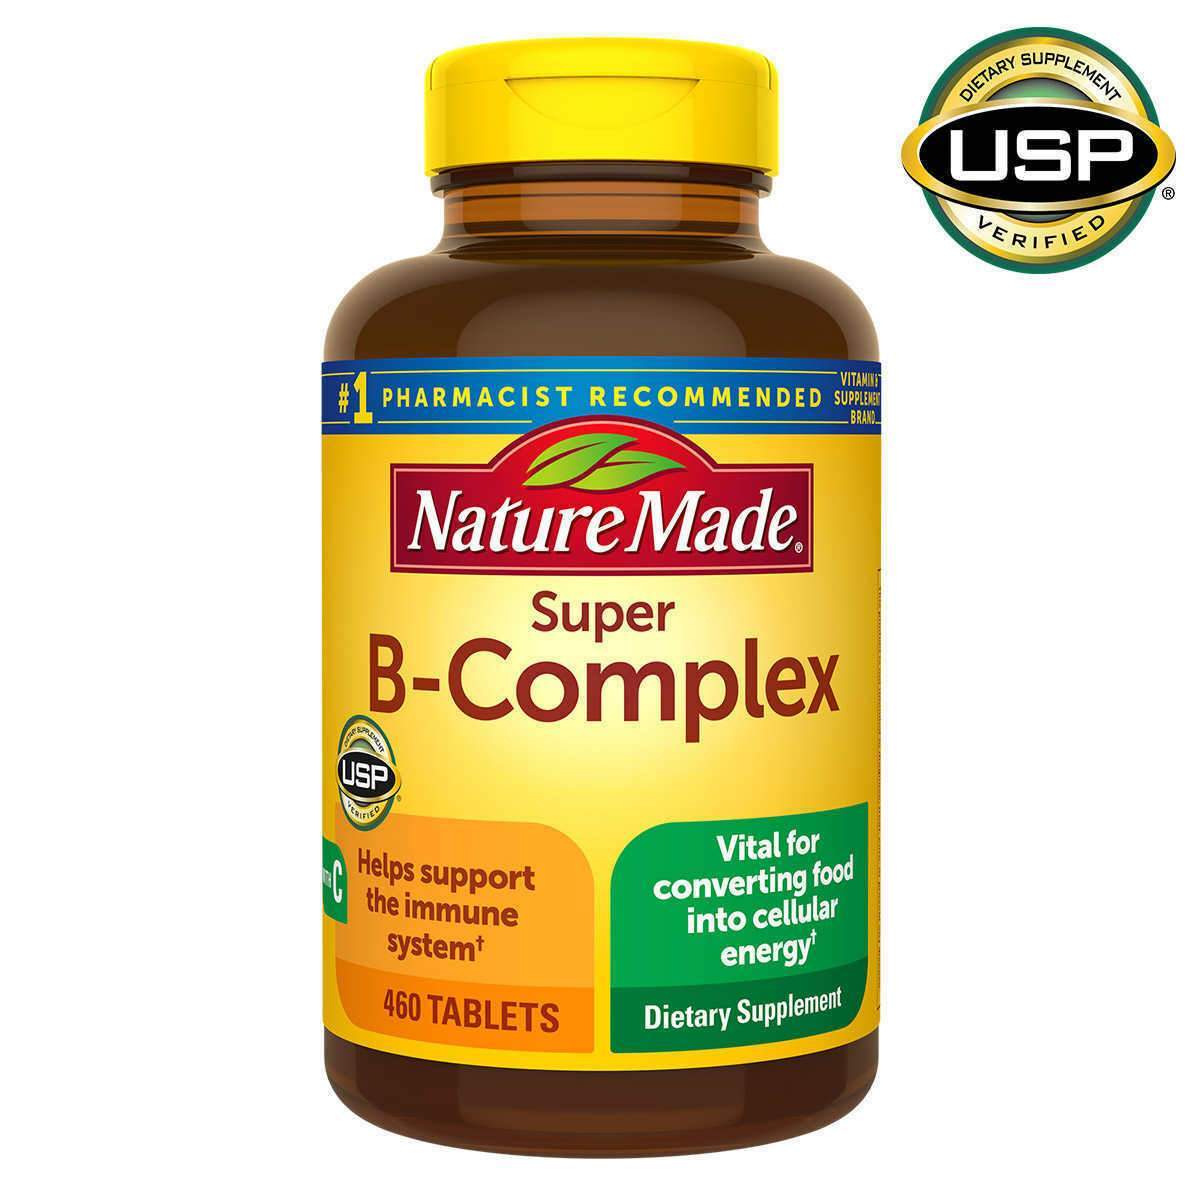 Primary image for Nature Made Super B-Complex, 460 Tablets